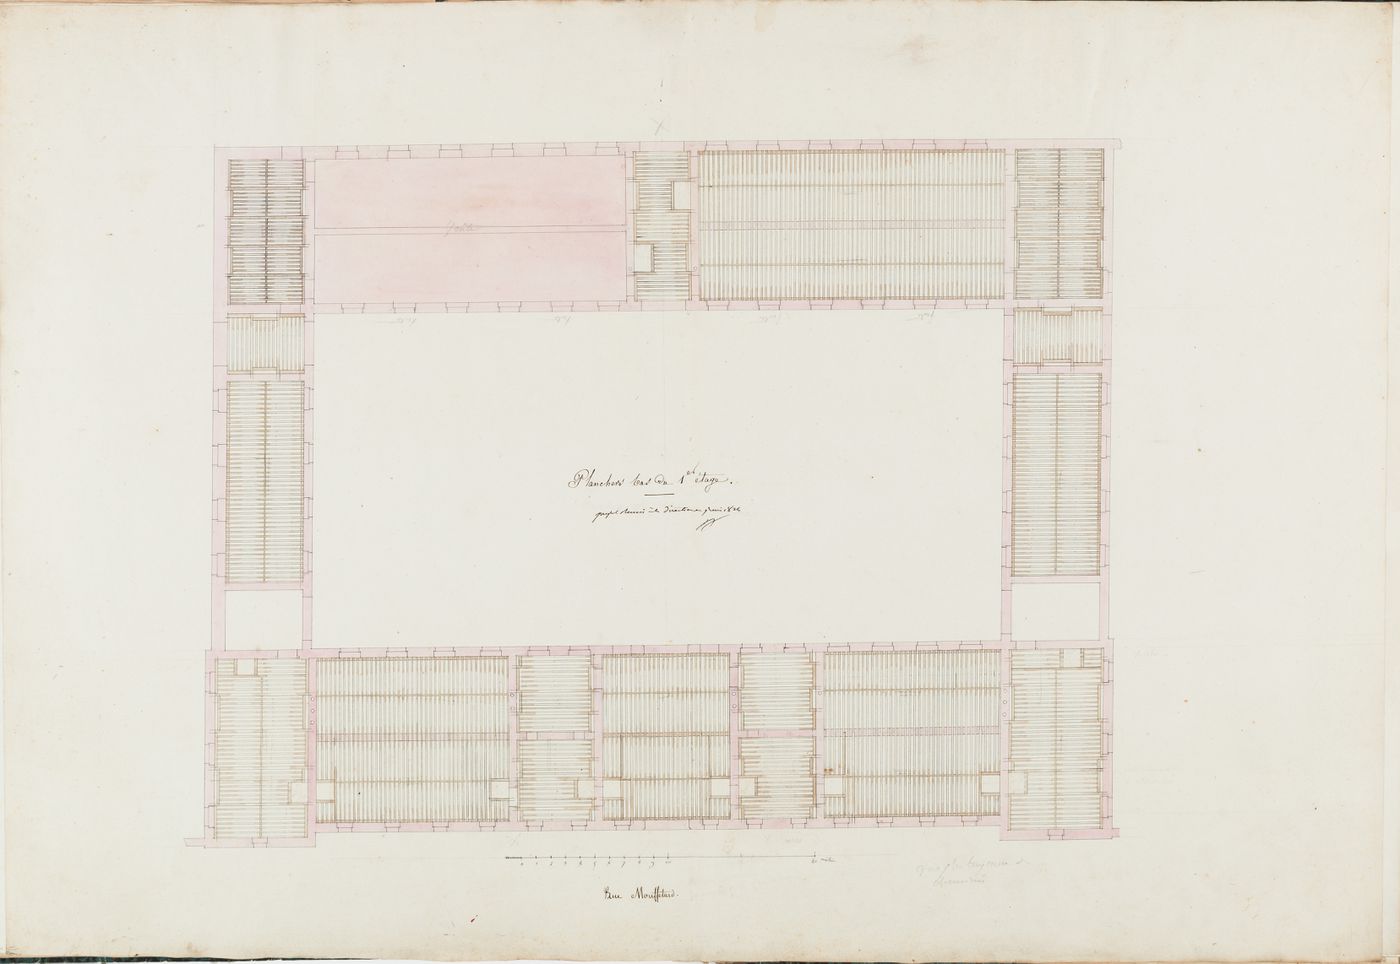 Project for the caserne de la Gendarmerie royale, rue Mouffetard: Floor framing plan for buildings surrounding the first courtyard, probably for the first floor